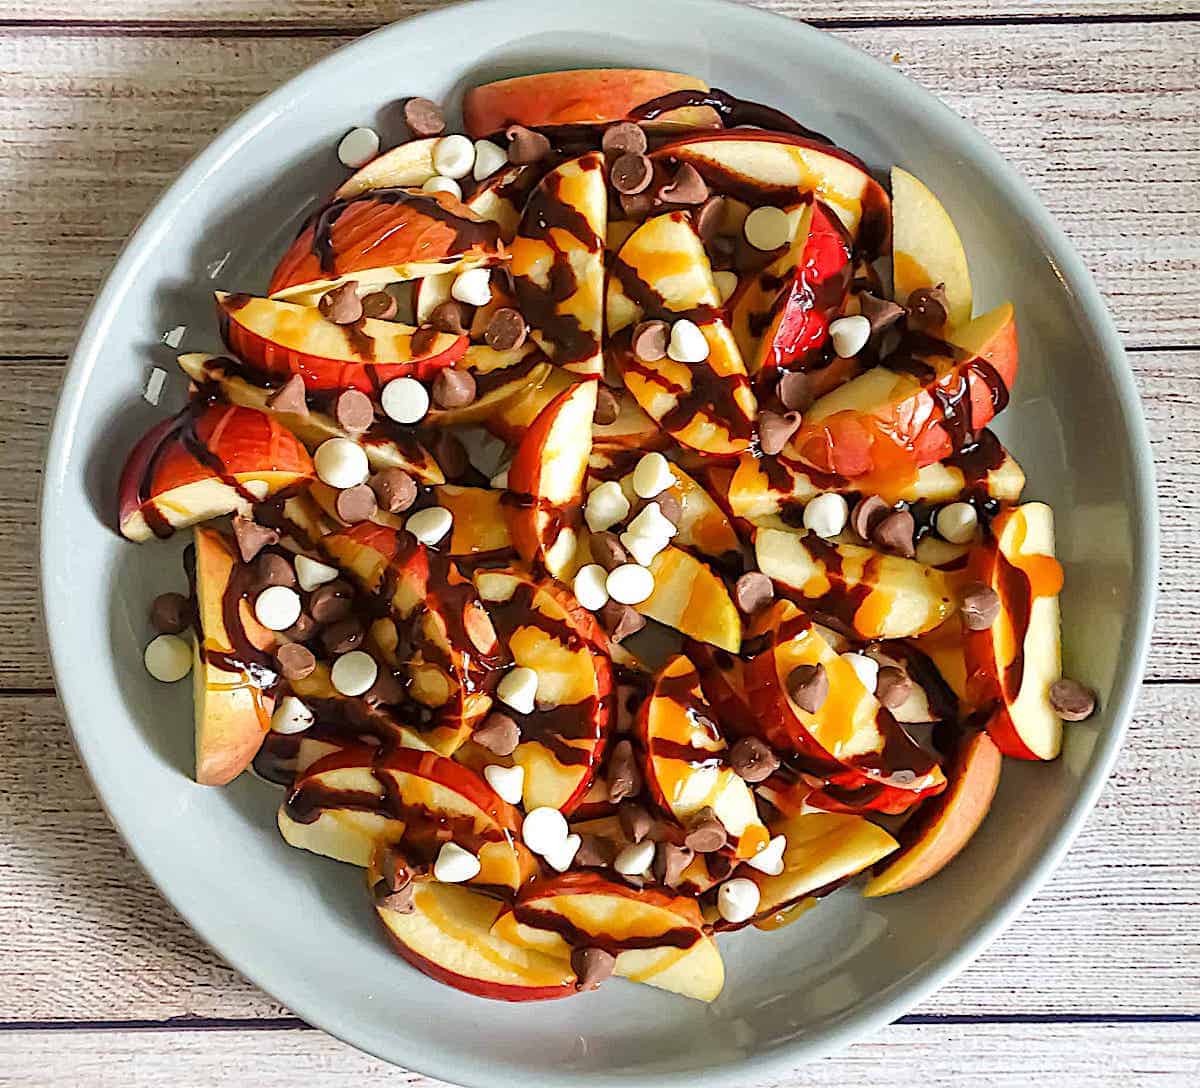 sliced apples drizzled with caramel, chocolate and chocolate chips